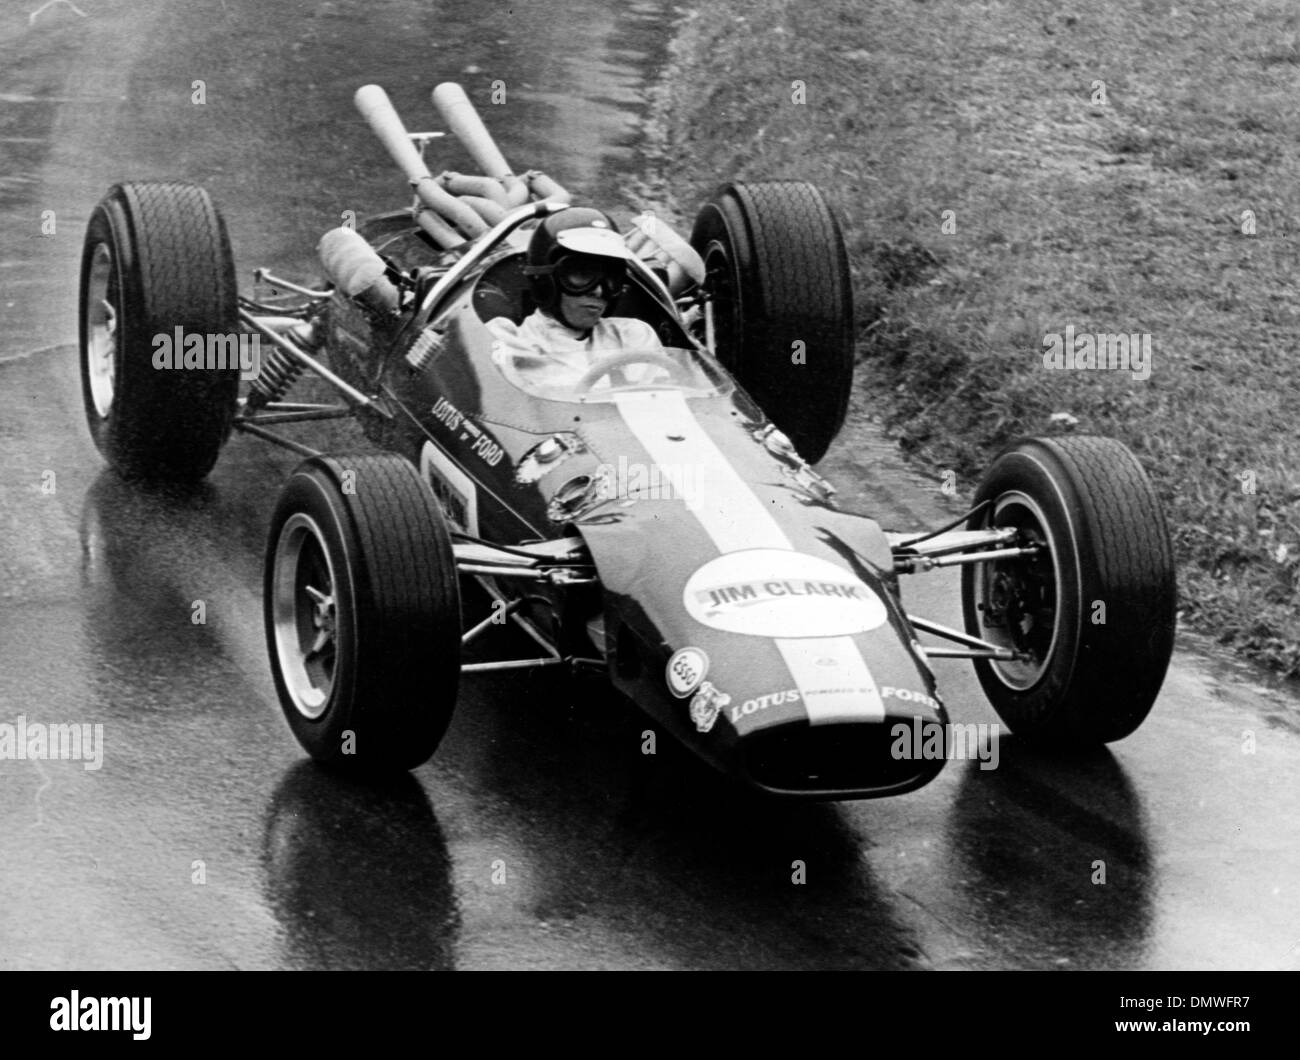 Aug 25, 1965 - Zurich, Switzerland - (File Photo) JIM CLARK was a British Formula One racing driver. Often called 'Jimmy' by fans, he was the dominant driver of his era, winning two World Championships, in 1963 and 1965. At the time of his death, he had won more Grand Prix races (25) and more pole positions (33) than any driver. He also competed in the Indianapolis 500 five times,  Stock Photo